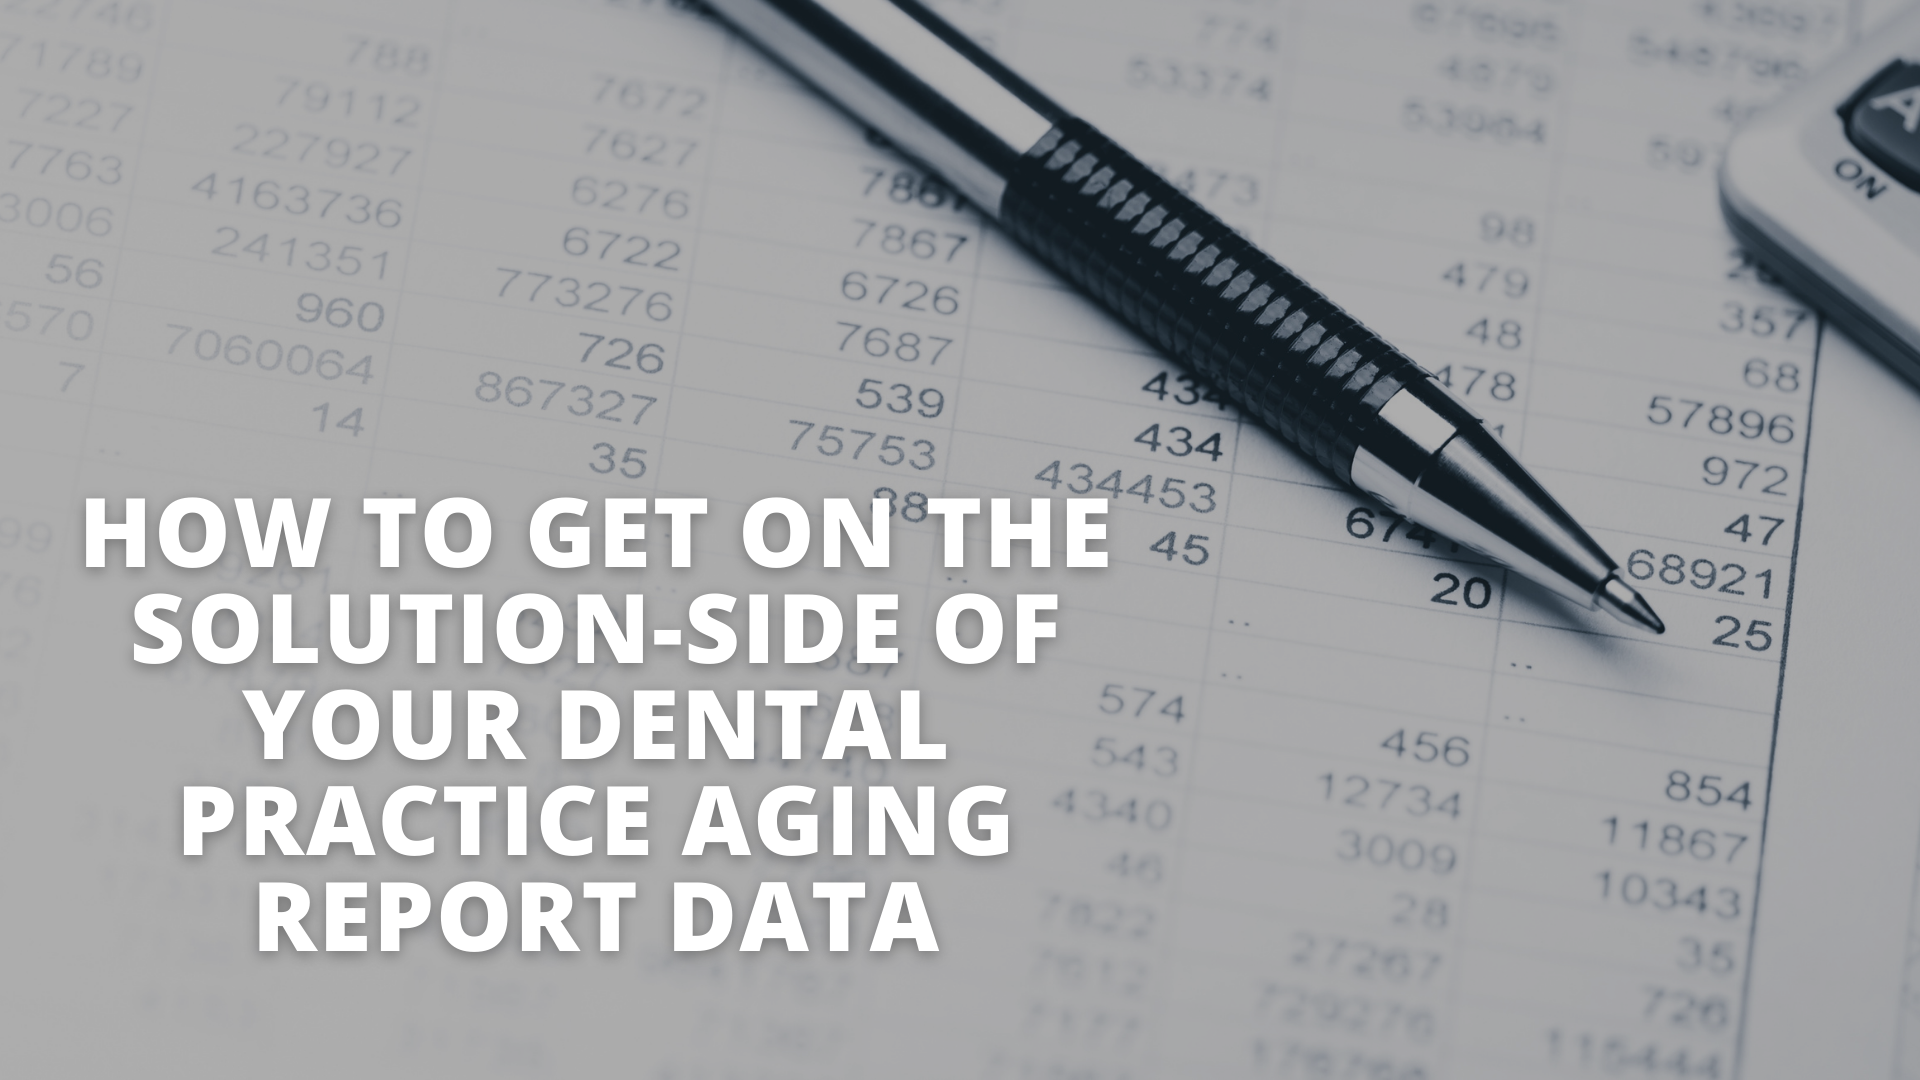 How to Get on the Solution-Side of Your Dental Practice Aging Report Data